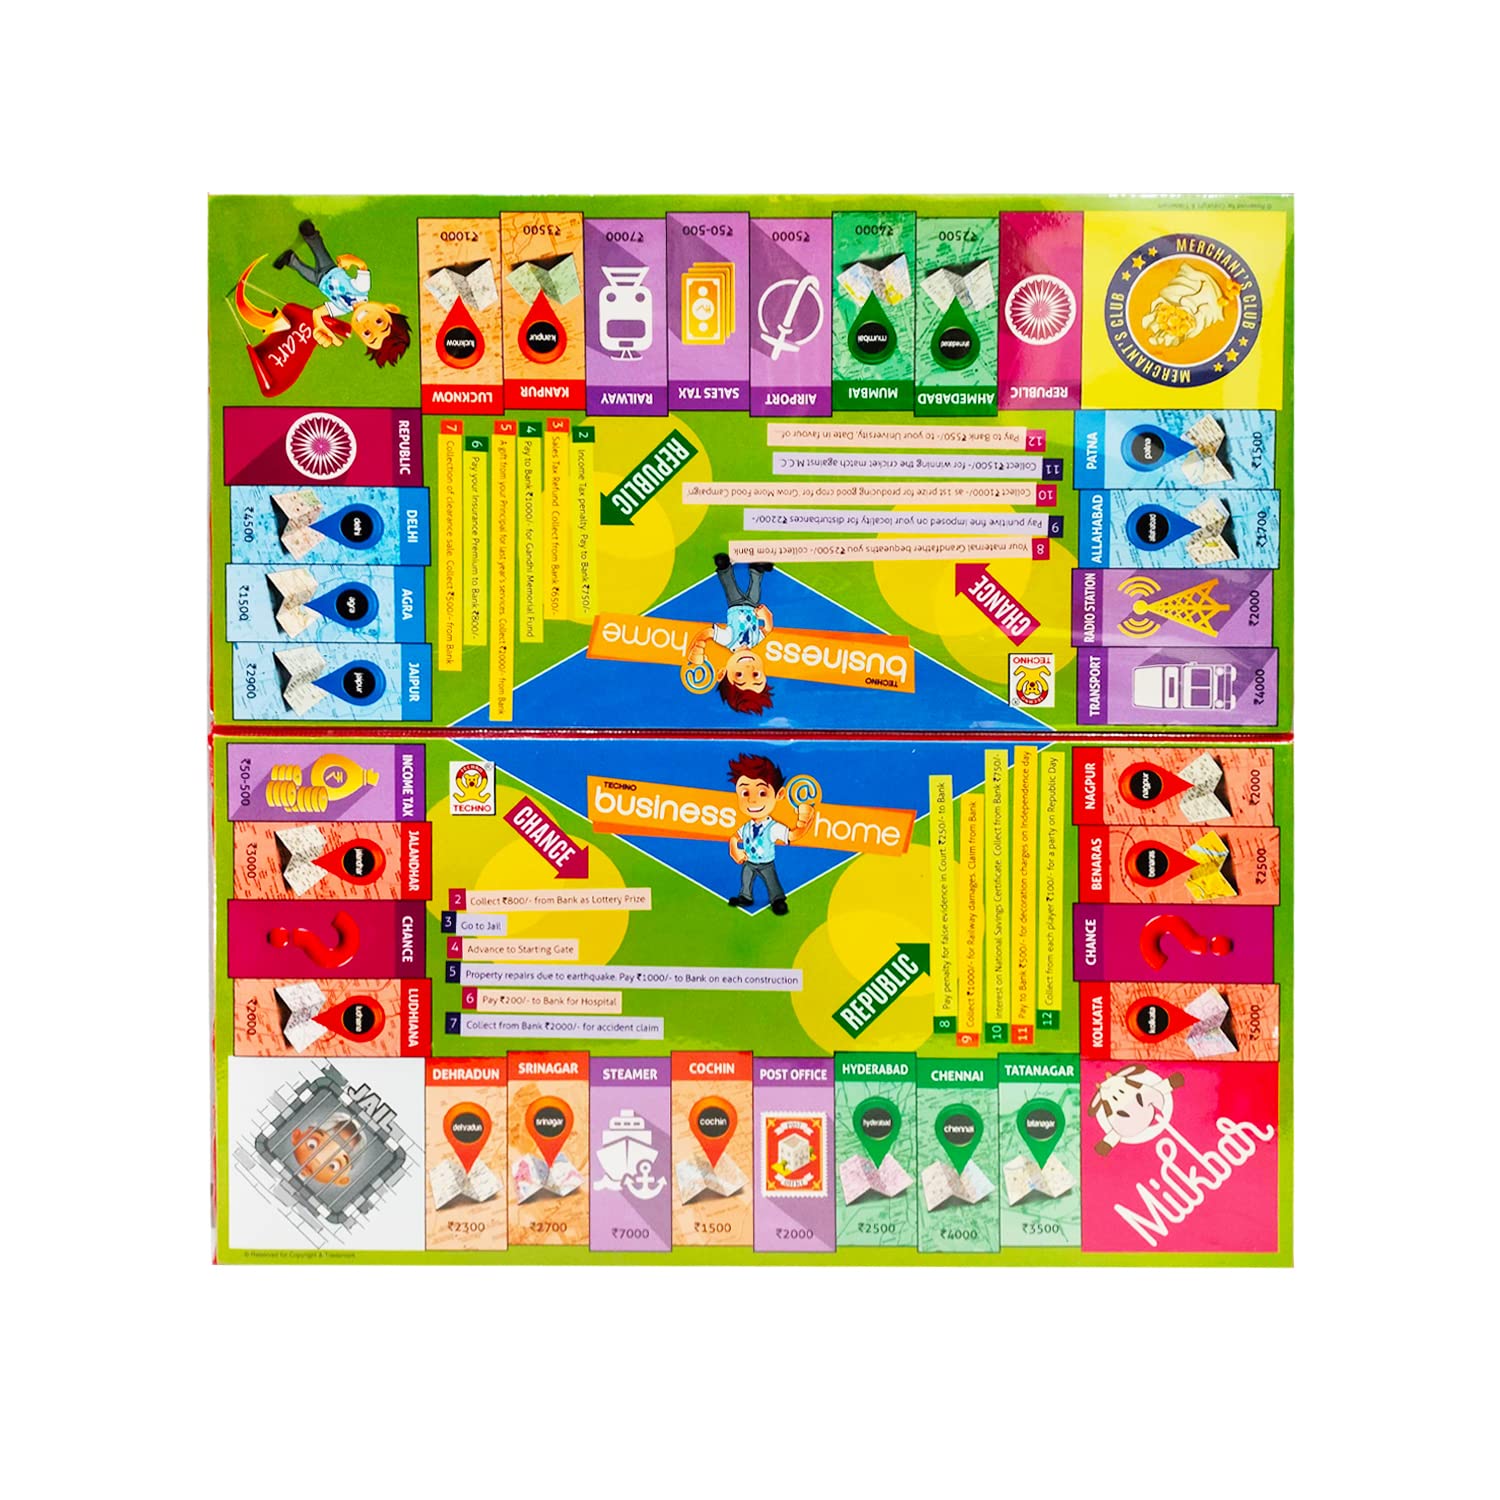 "Kids Mandi Techno Business Game with Money Notes"